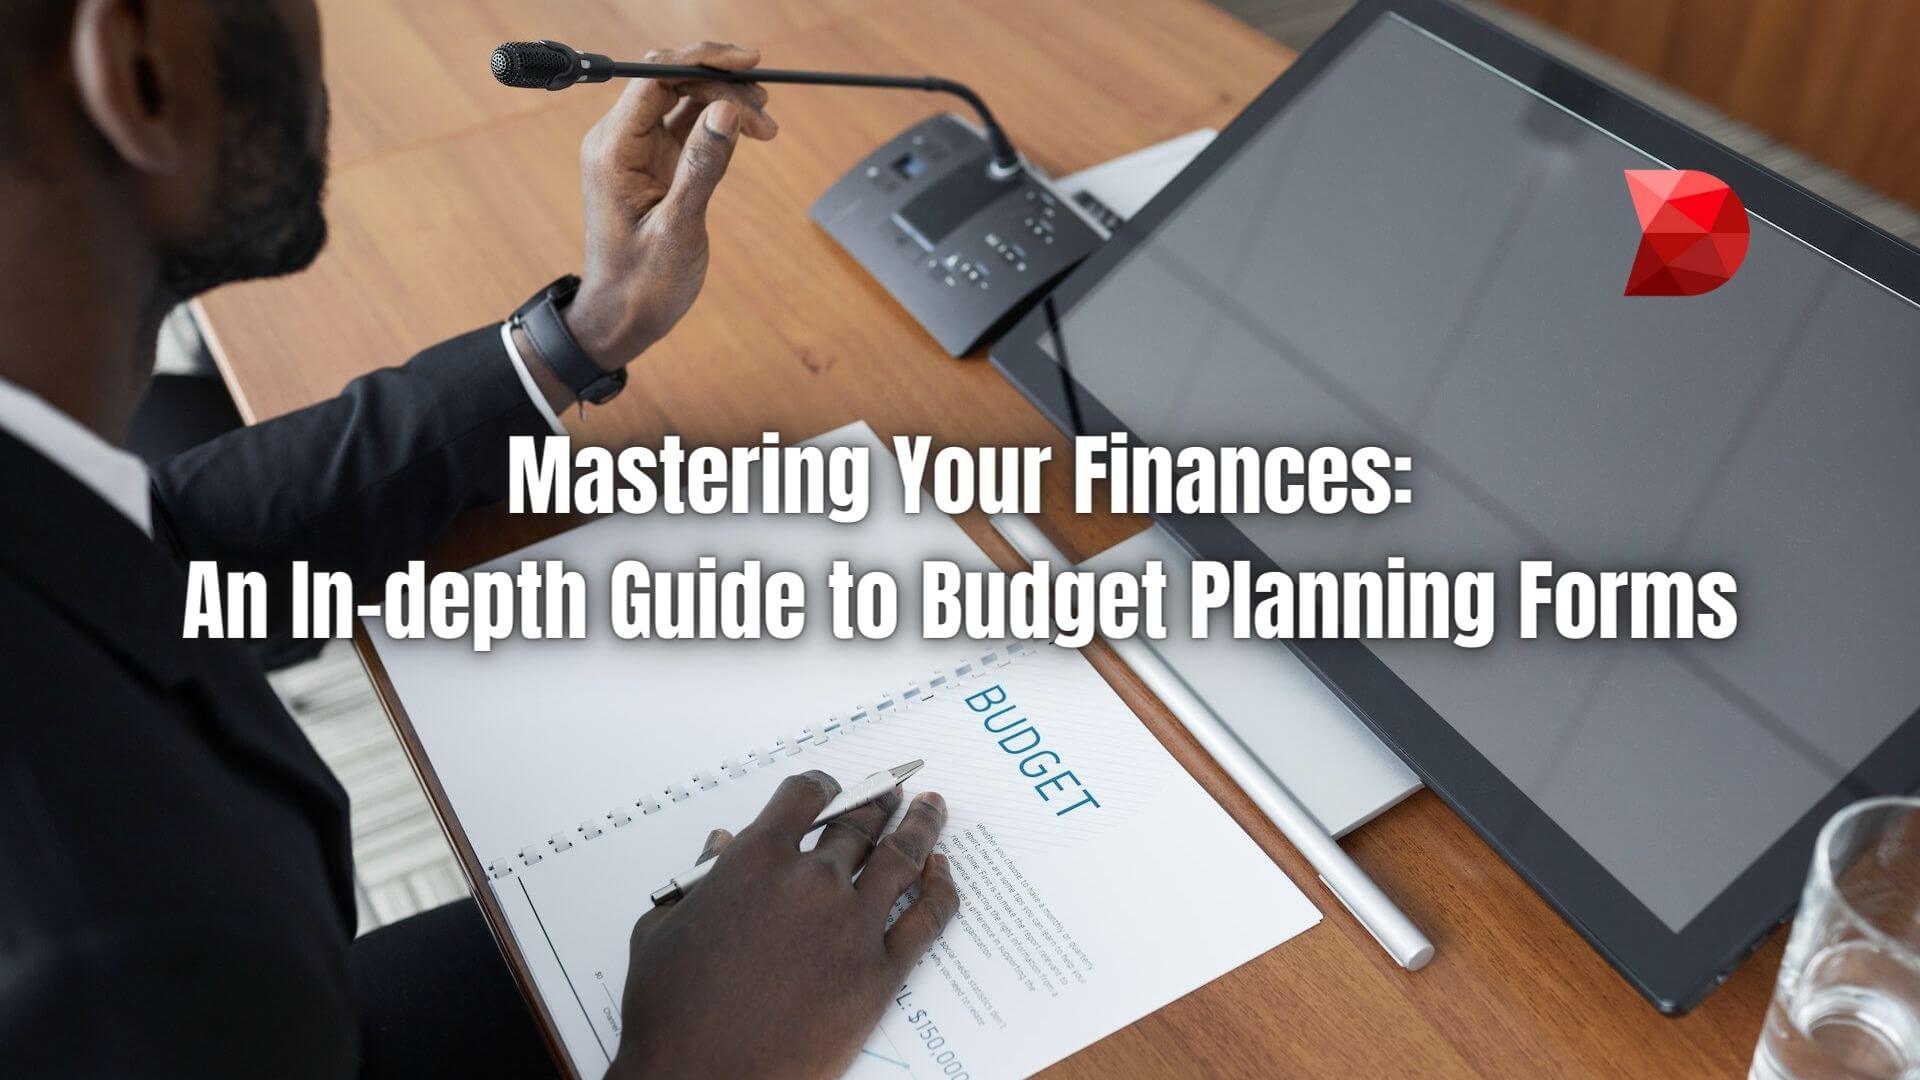 A Budget Planning Form is a tool used to organize, plan, and control an individual's, family's, or organization's finances. Learn more!